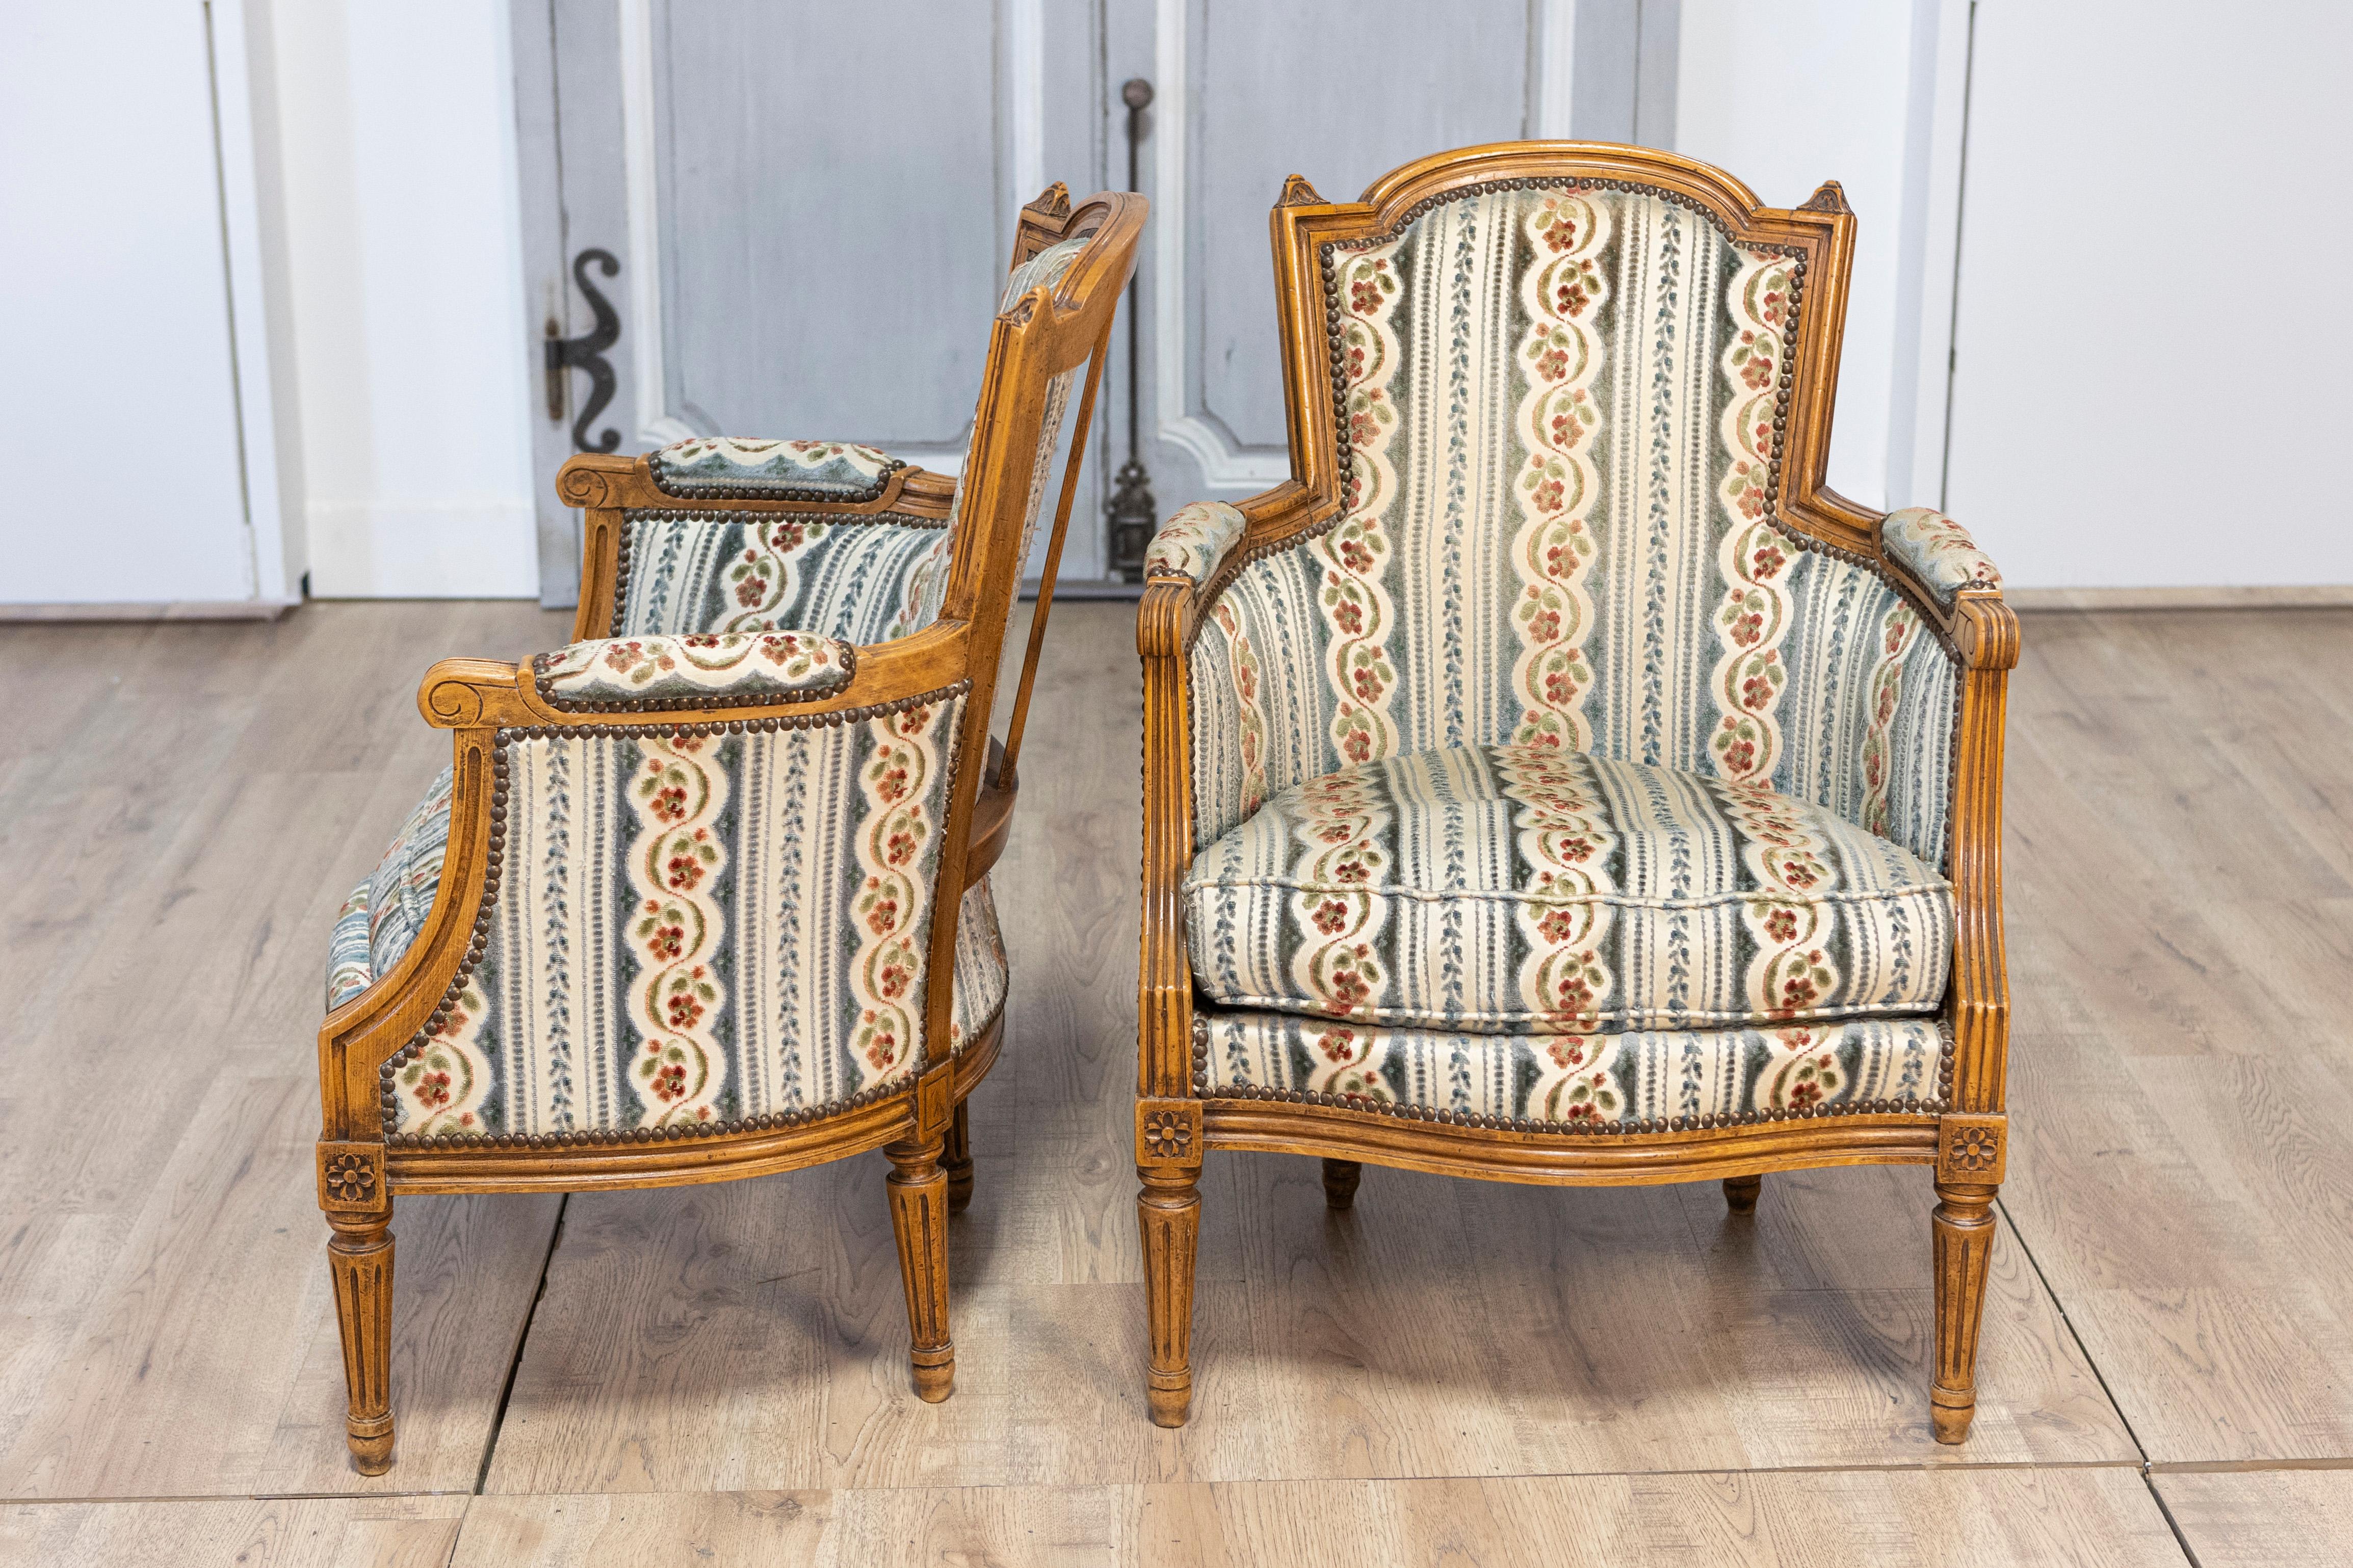 20th Century Pair of French Louis XVI Style Walnut Bergères Chairs with Carved Fluted Legs For Sale